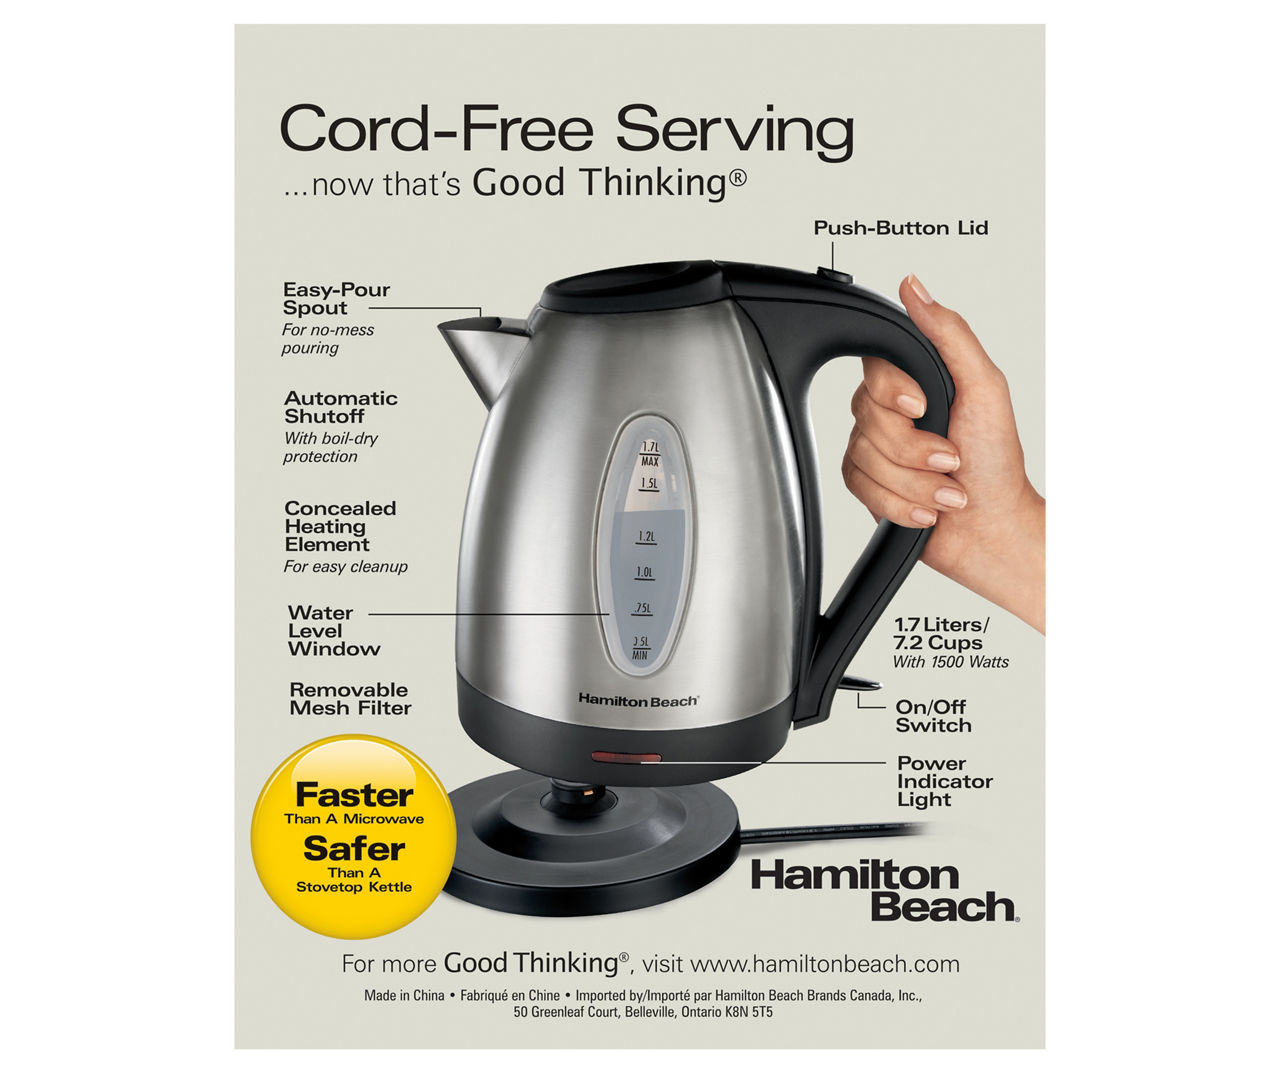 Hamilton Beach Electric Kettle, 1 Liter Capacity, Stainless Steel